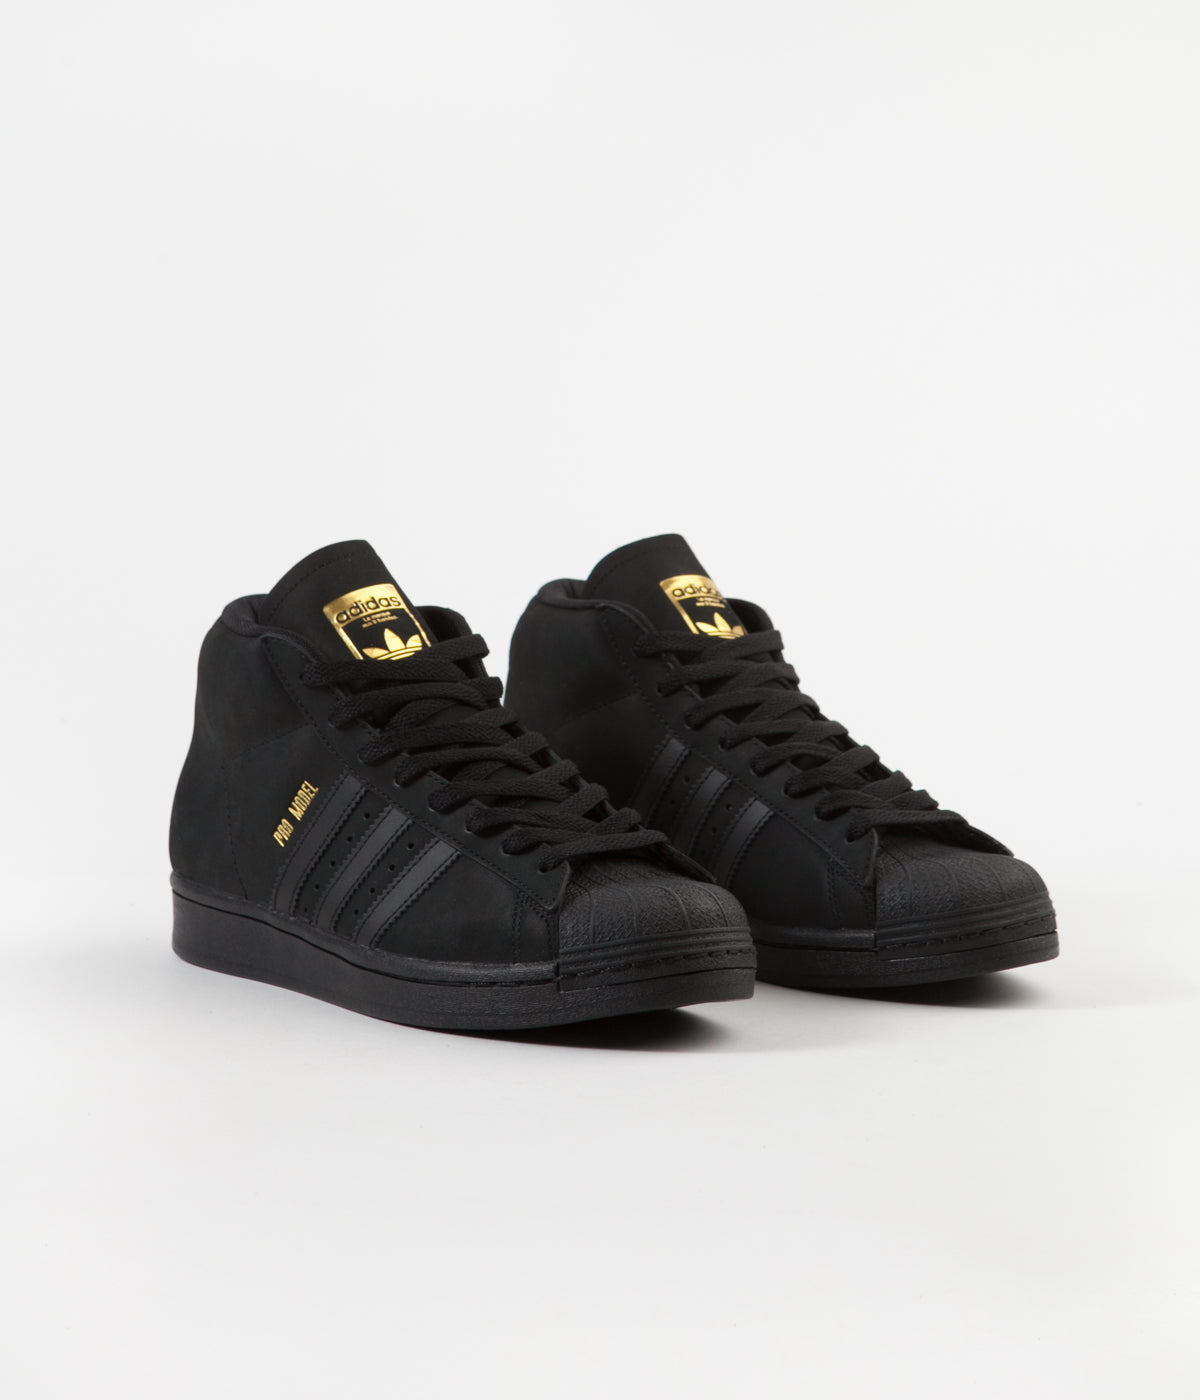 adidas pro model black and gold